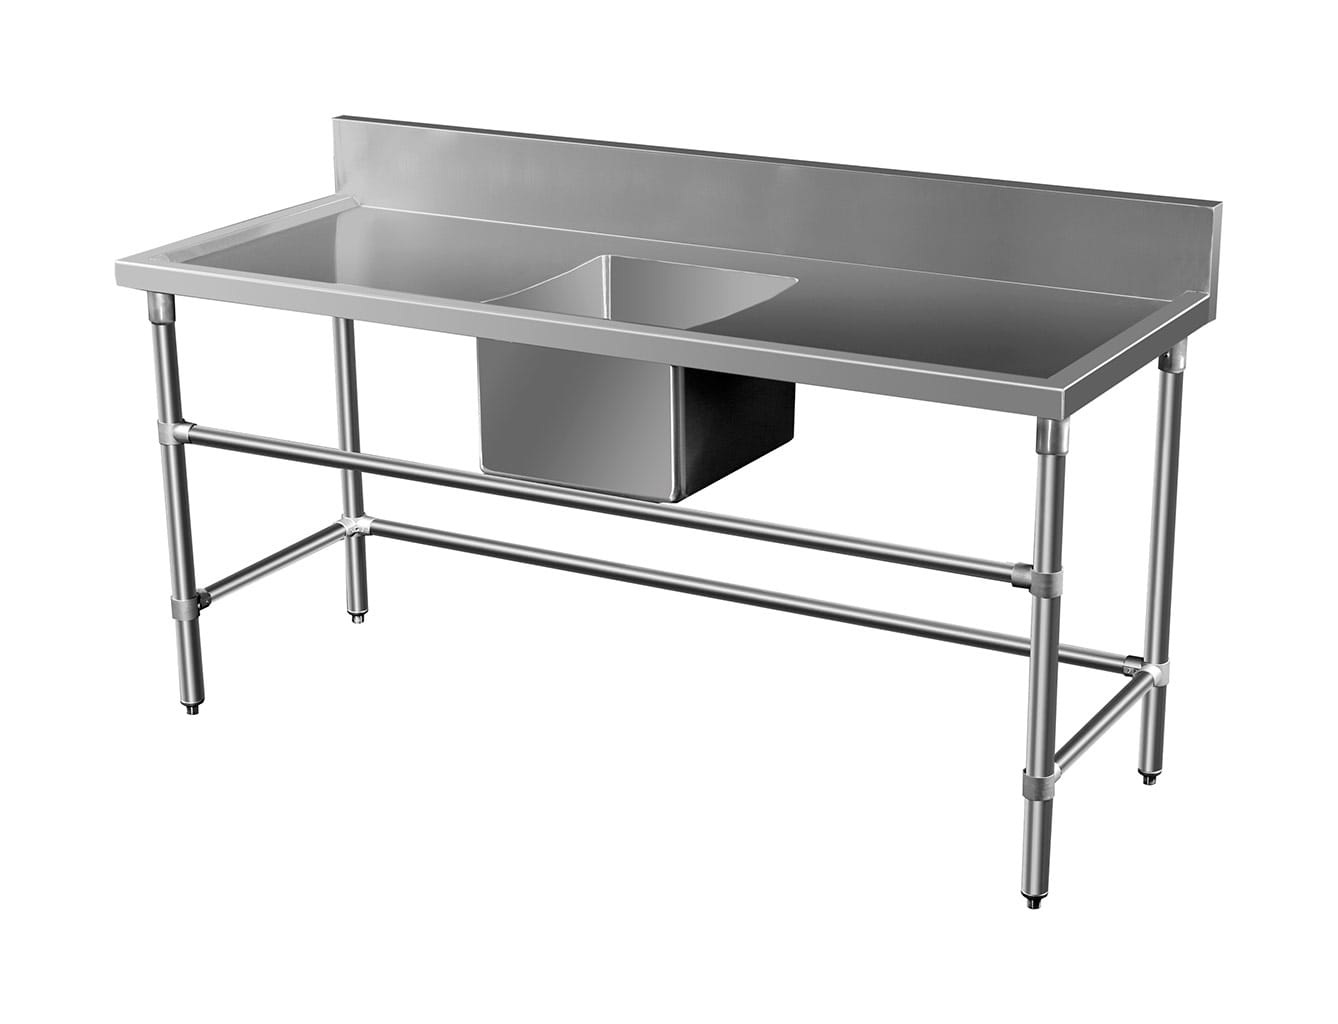 Stainless Steel Catering Sink – Right And Left Bench, 1500 x 700 x 900mm high